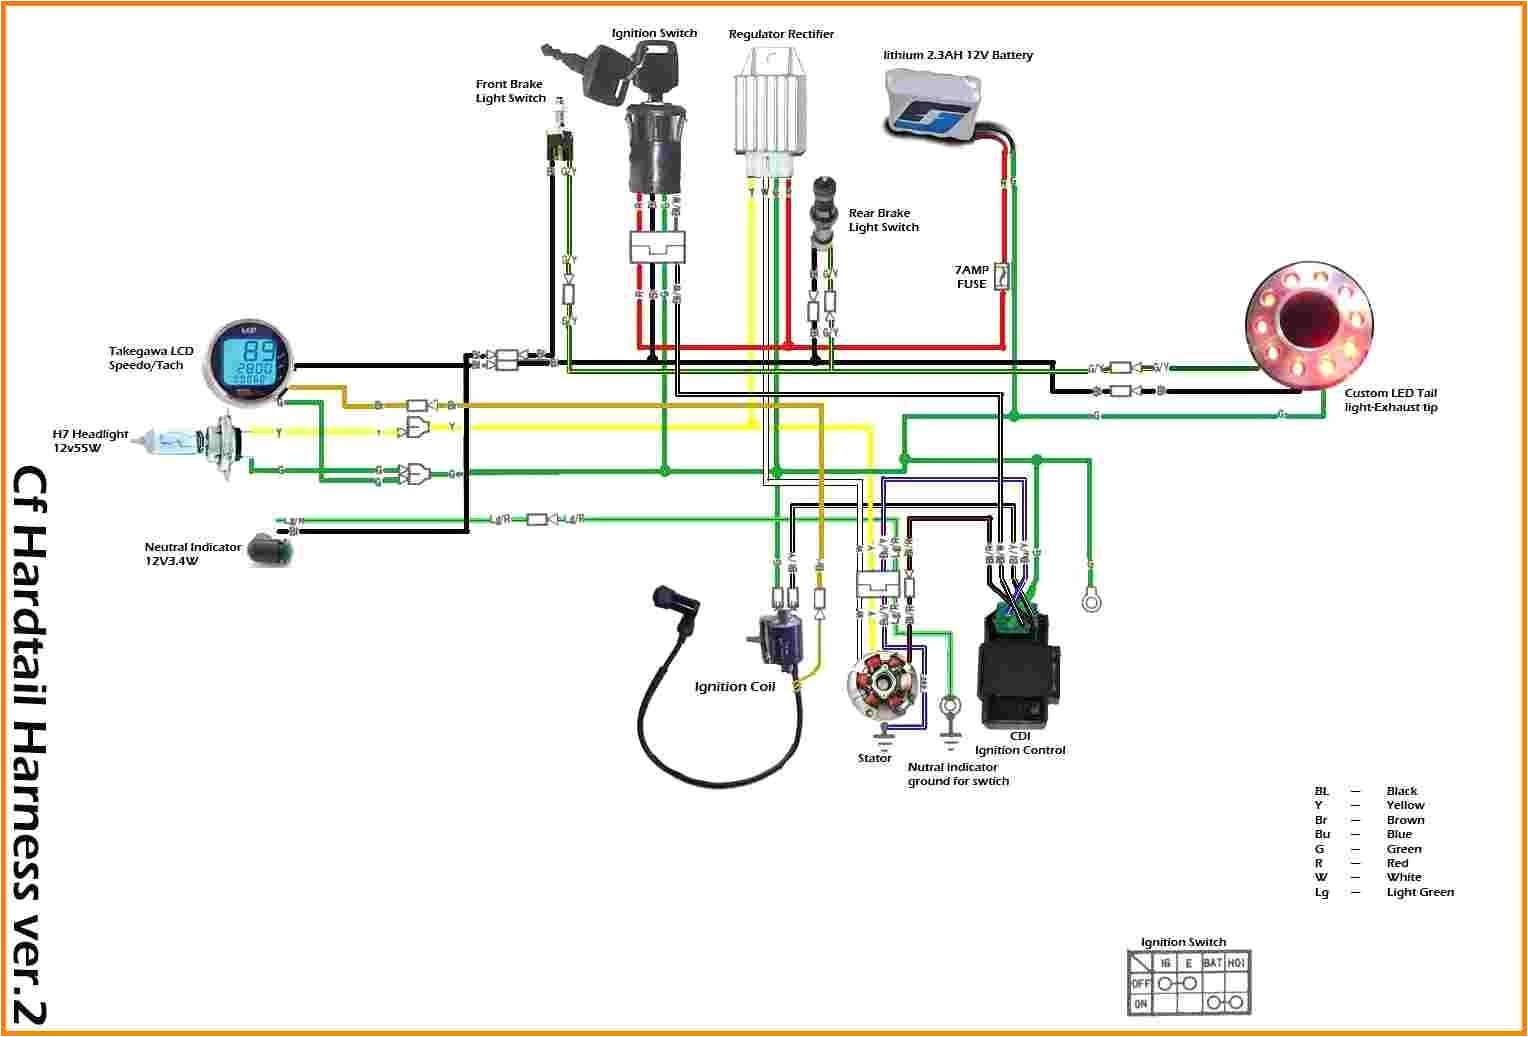 amor 50cc wiring diagram wiring diagram for you amor 50cc wiring diagram